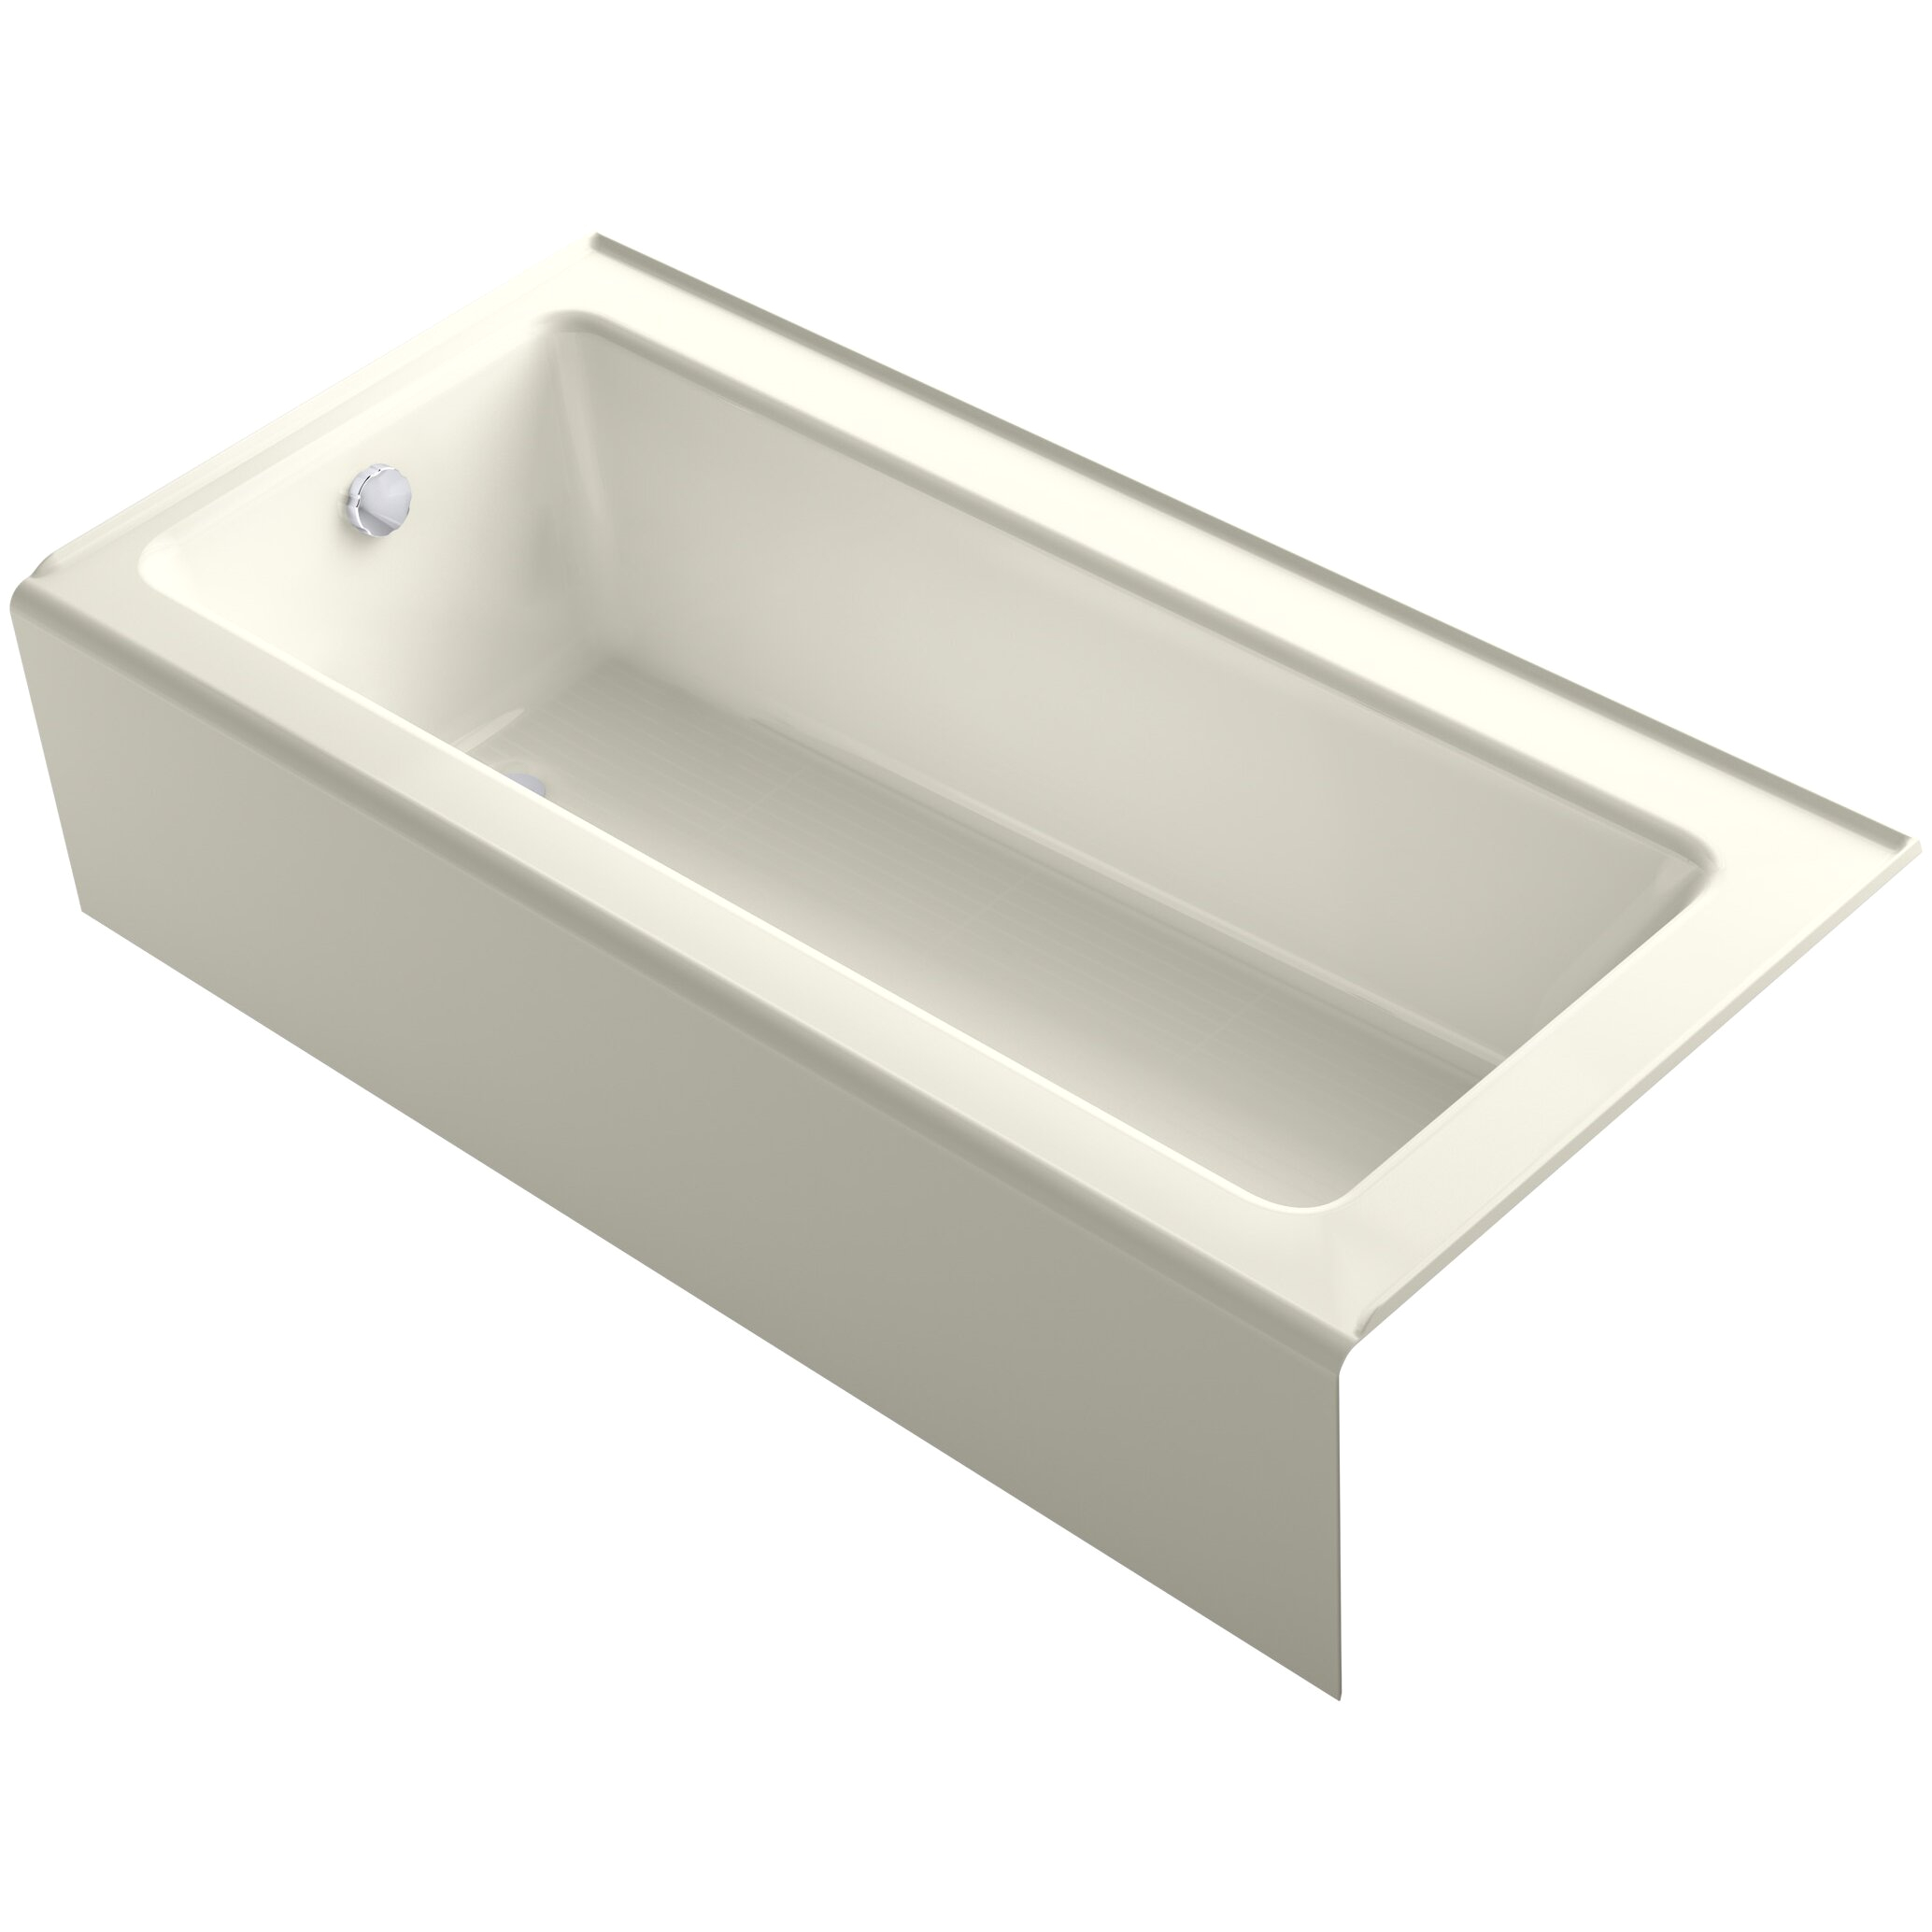 Kohler Bellwether 66 X 32 Alcove Bath with Integral Apron and Left Hand Drain K 847 0 KOH